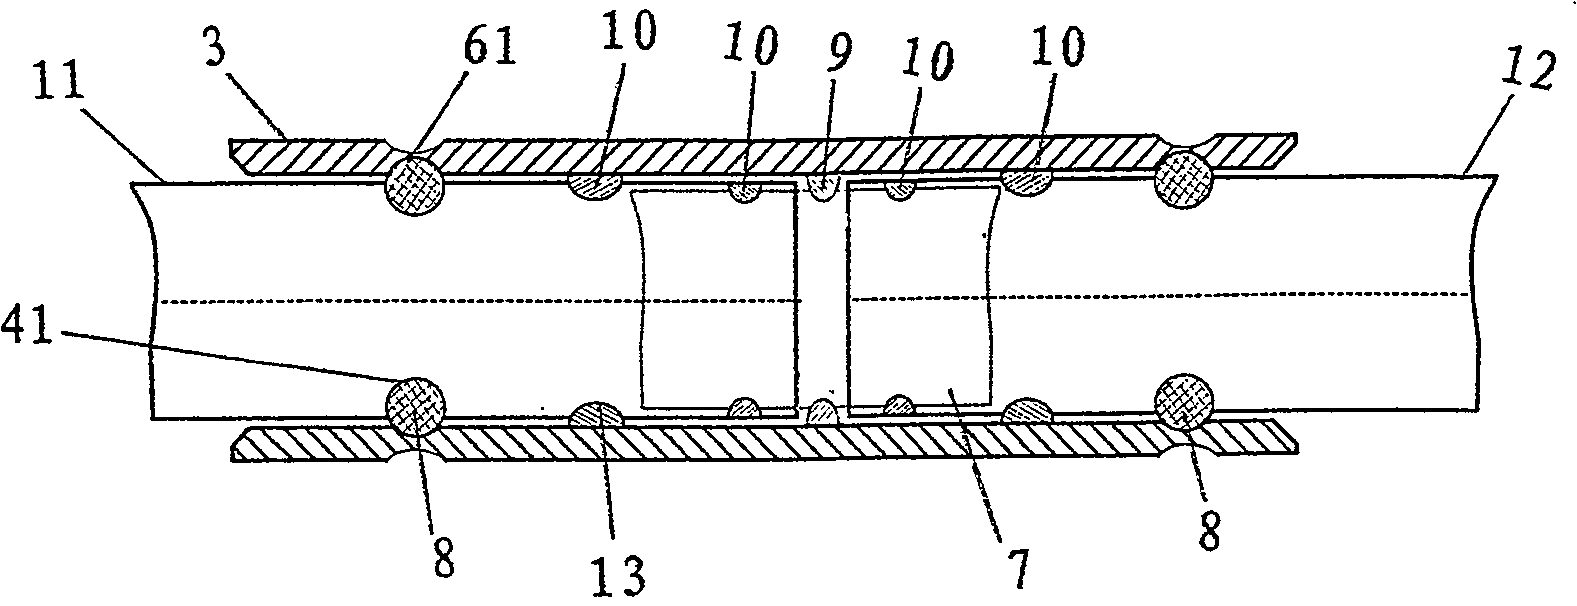 Tube jointing structure with locking bar